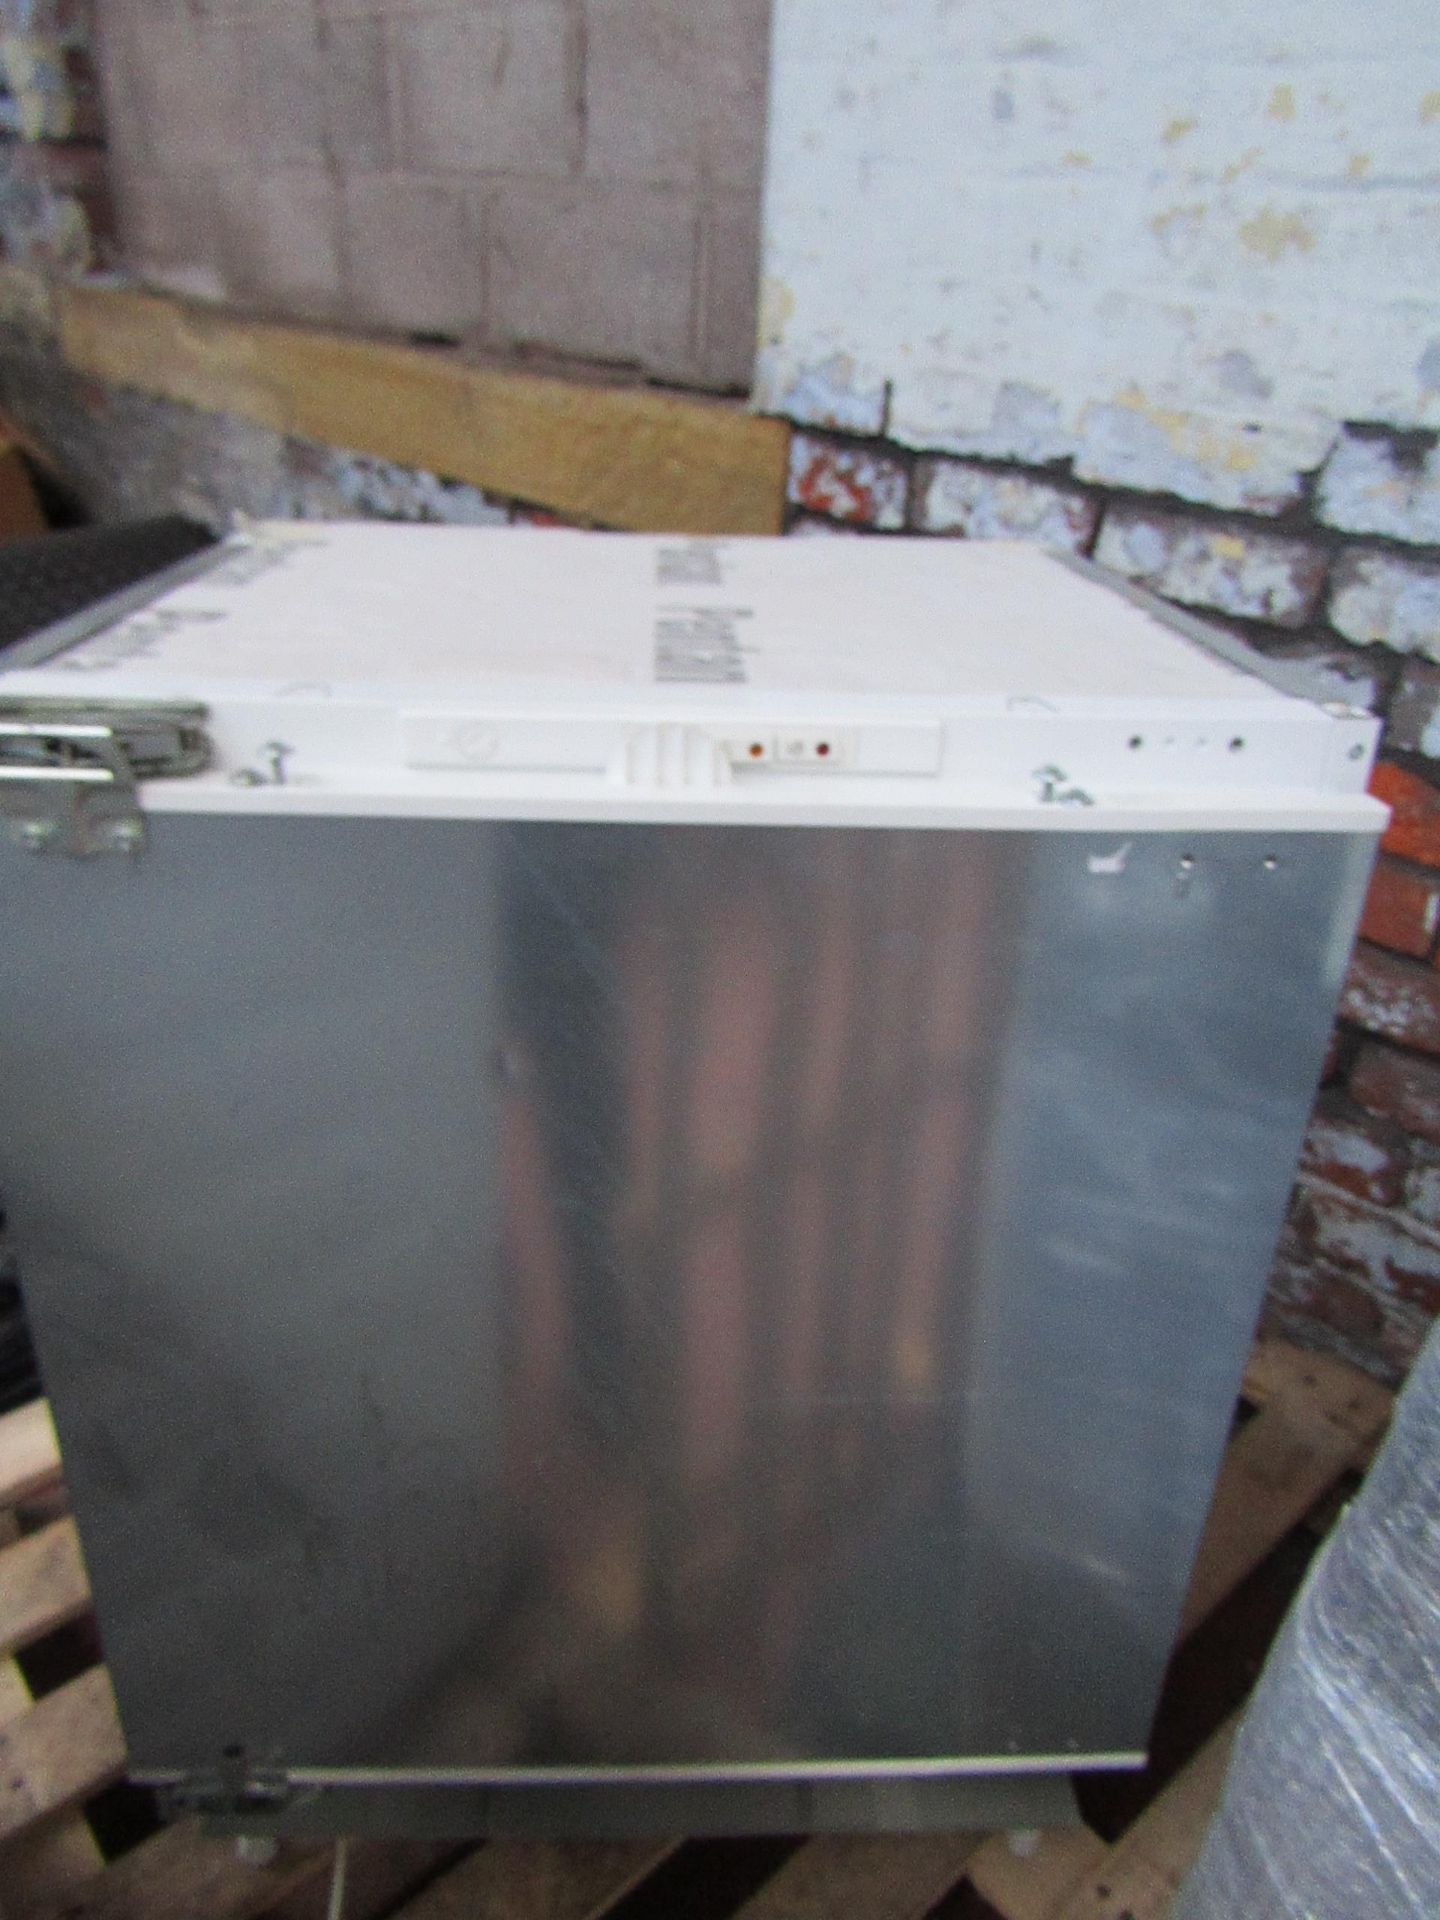 Neff intergrated under-counter .freezer, tested working, the plastic drawer front is cracked and